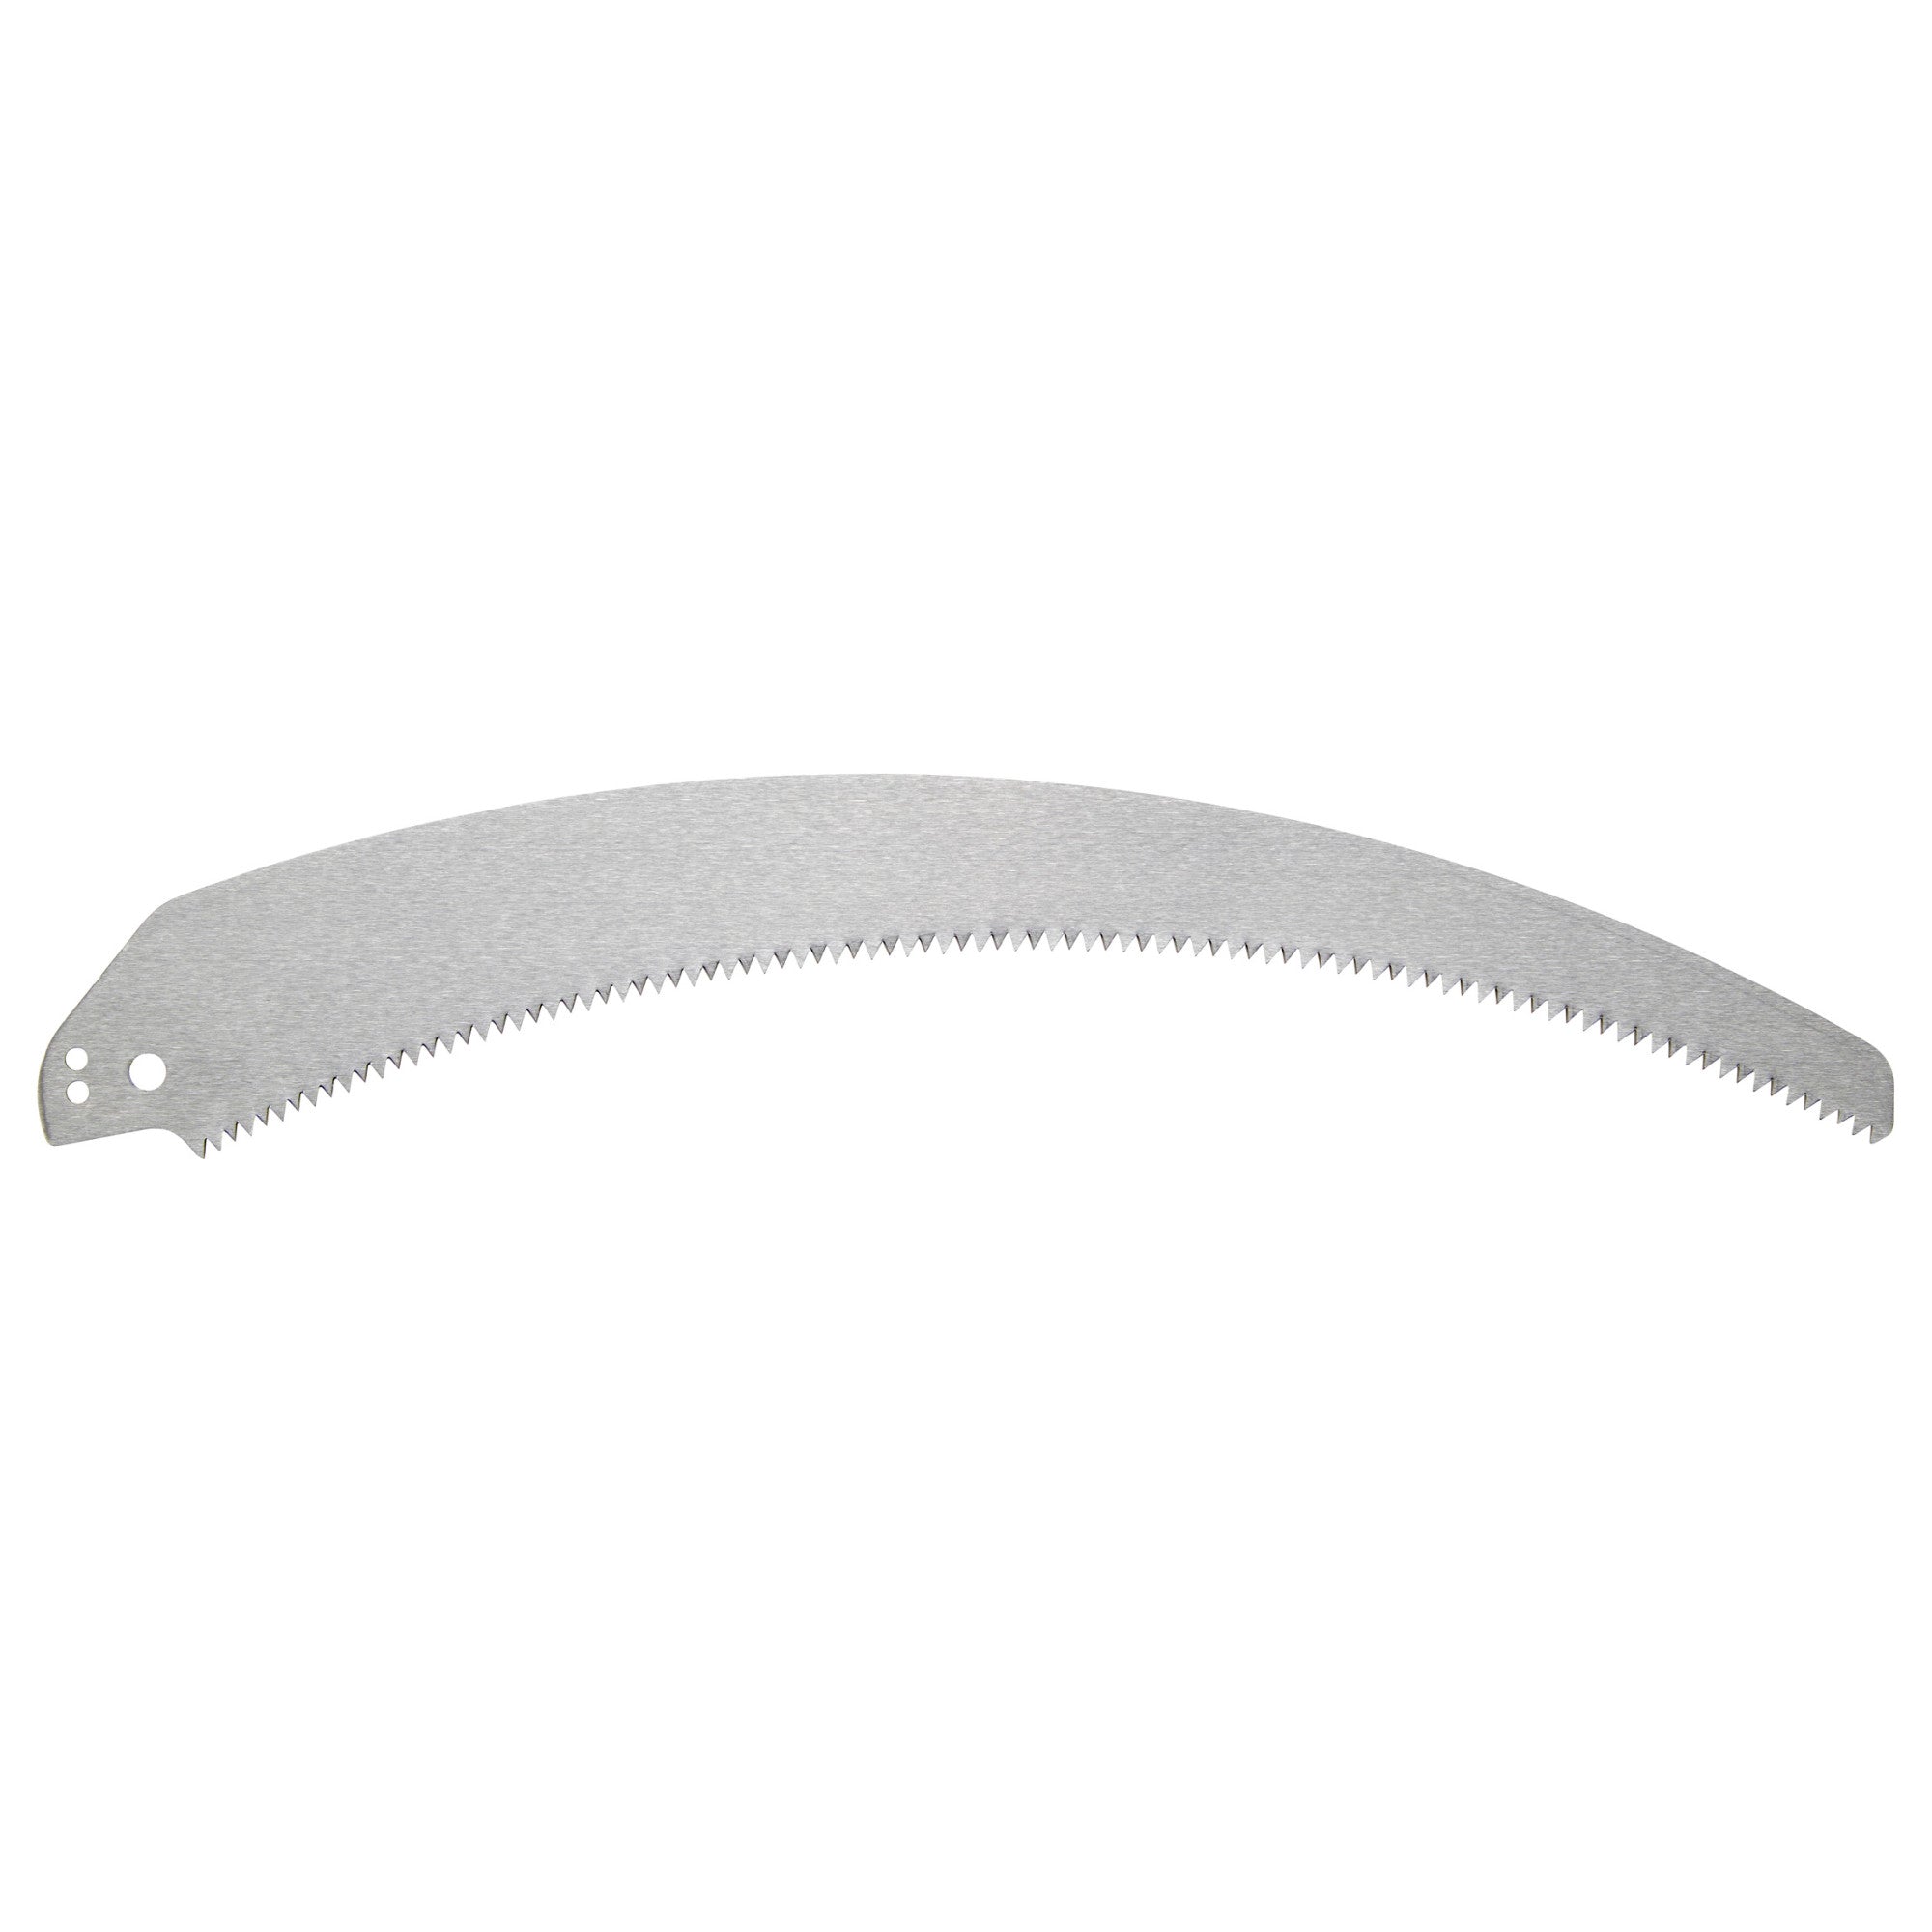 Replacement Conventional Saw Blade for Compound Action Tree Pruner with Rope Drive